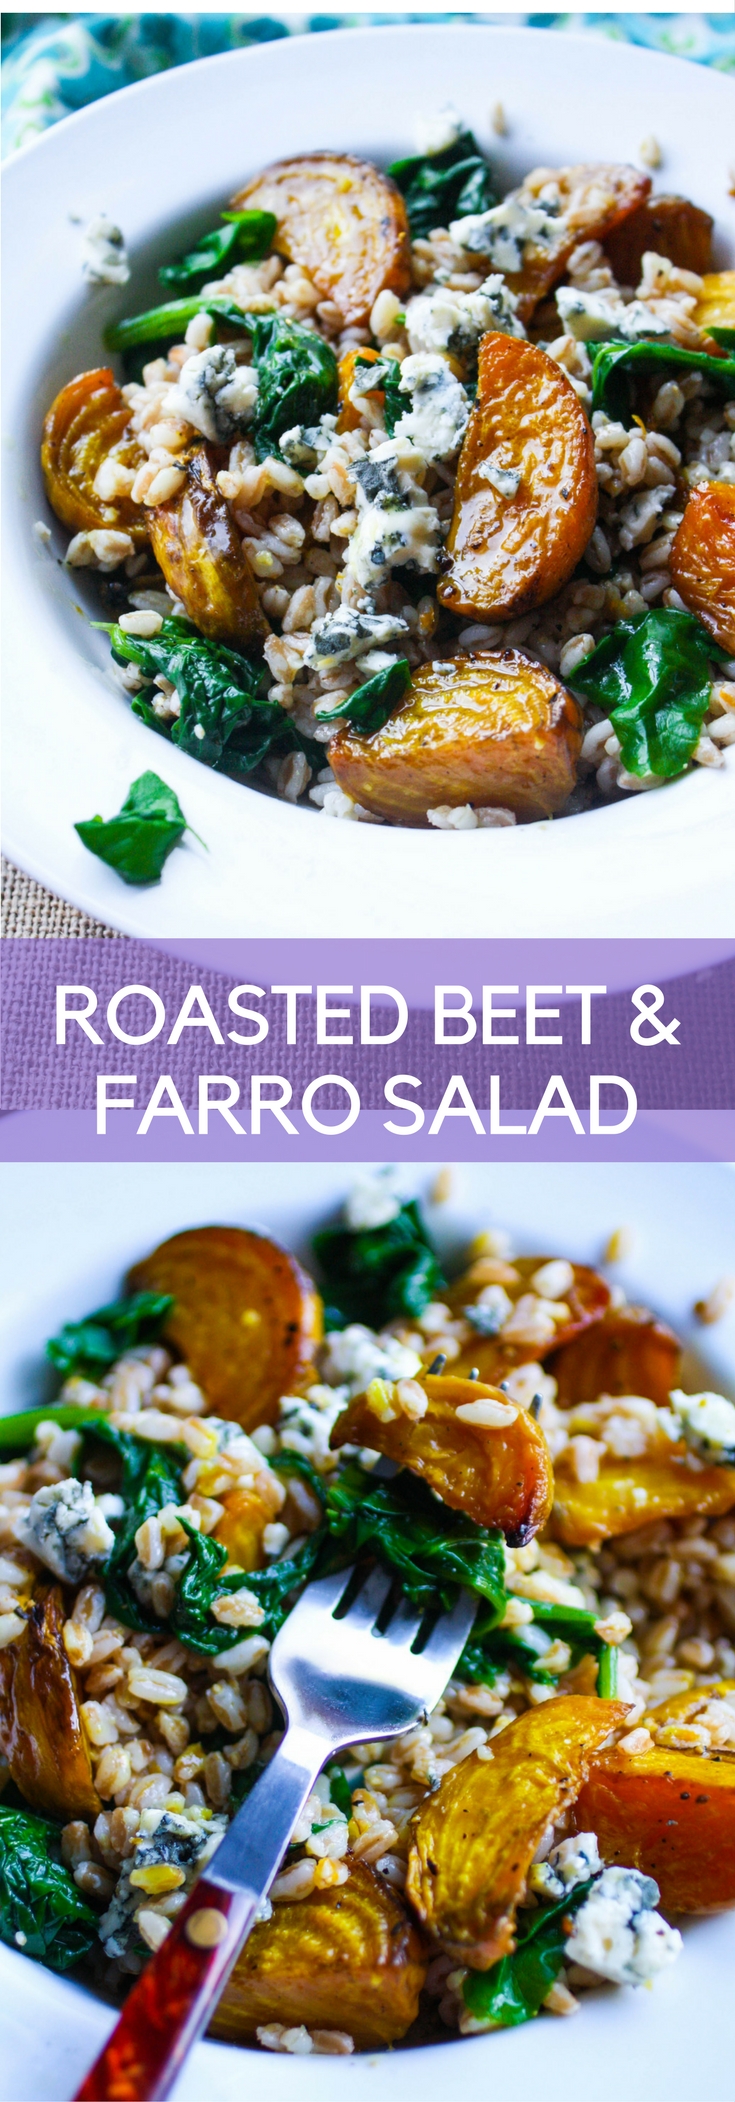 Roasted Beet & Farro Salad is a treat during the winter months. This salad will shine with roasted beets and hearty farro.